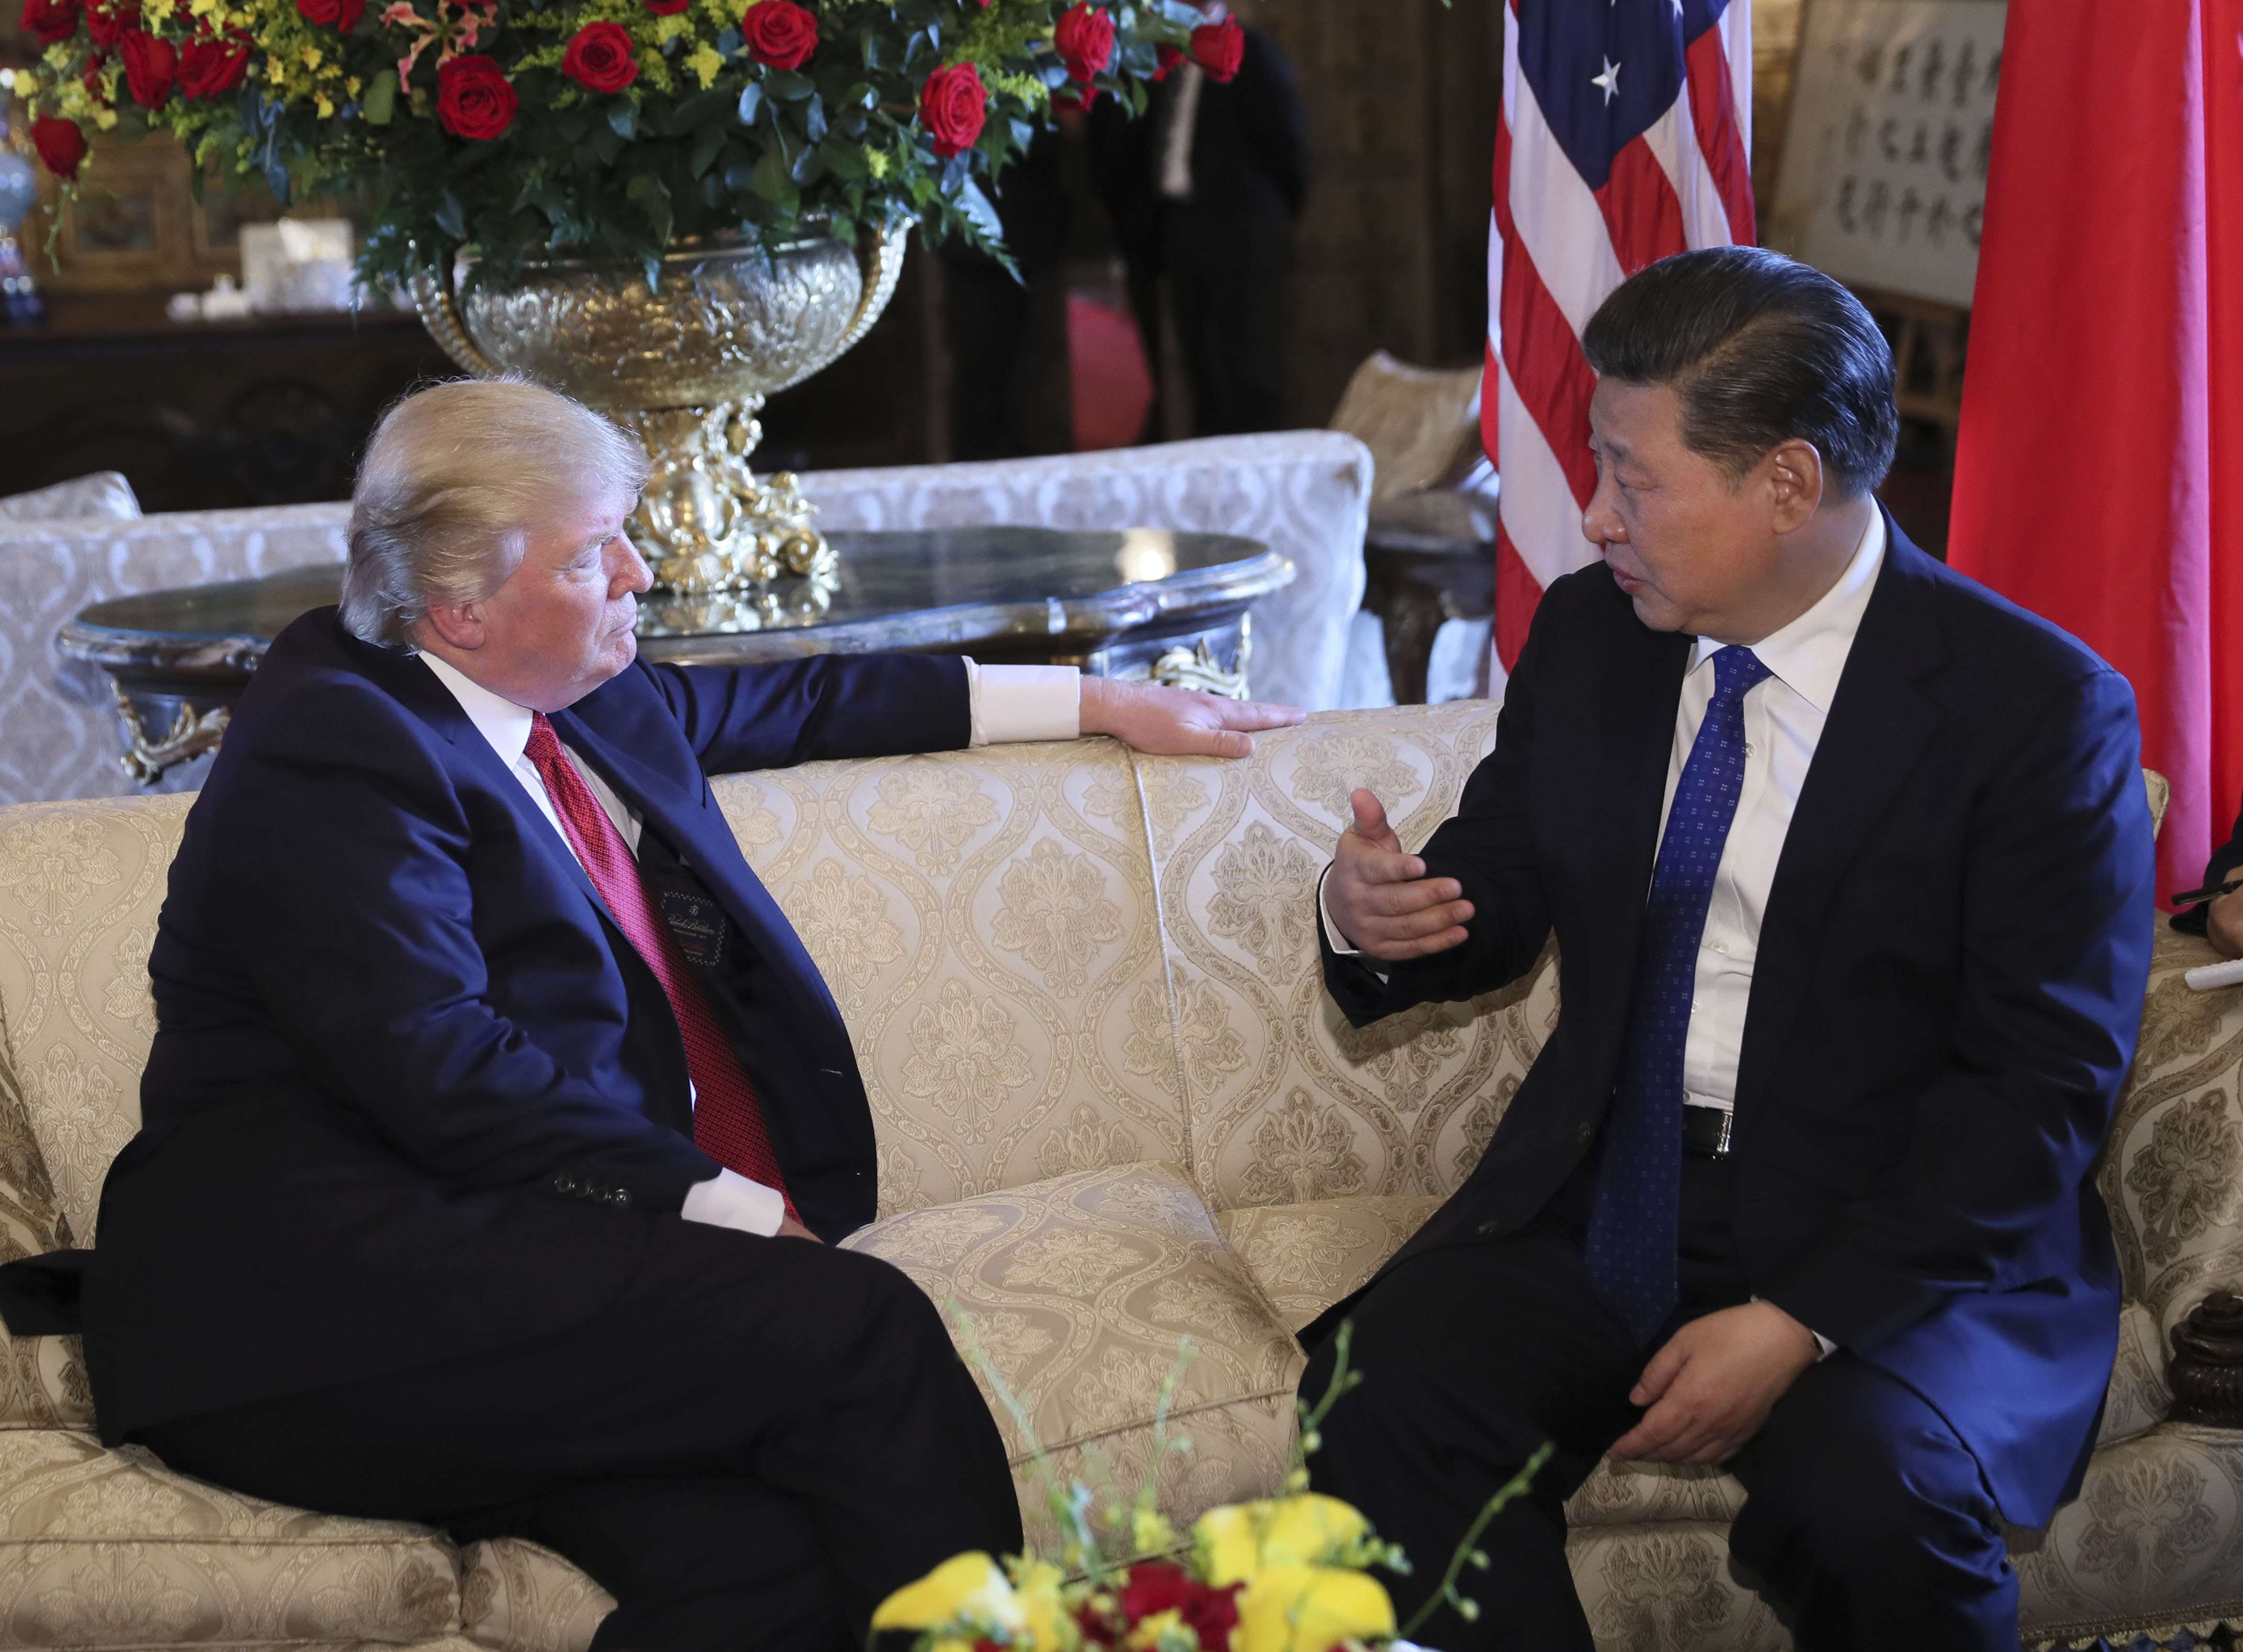 By targeting the Middle Eastern nation while hosting Xi Jinping, Trump is signalling he’ll act alone if Beijing doesn’t rein in Pyongyang, analysts say